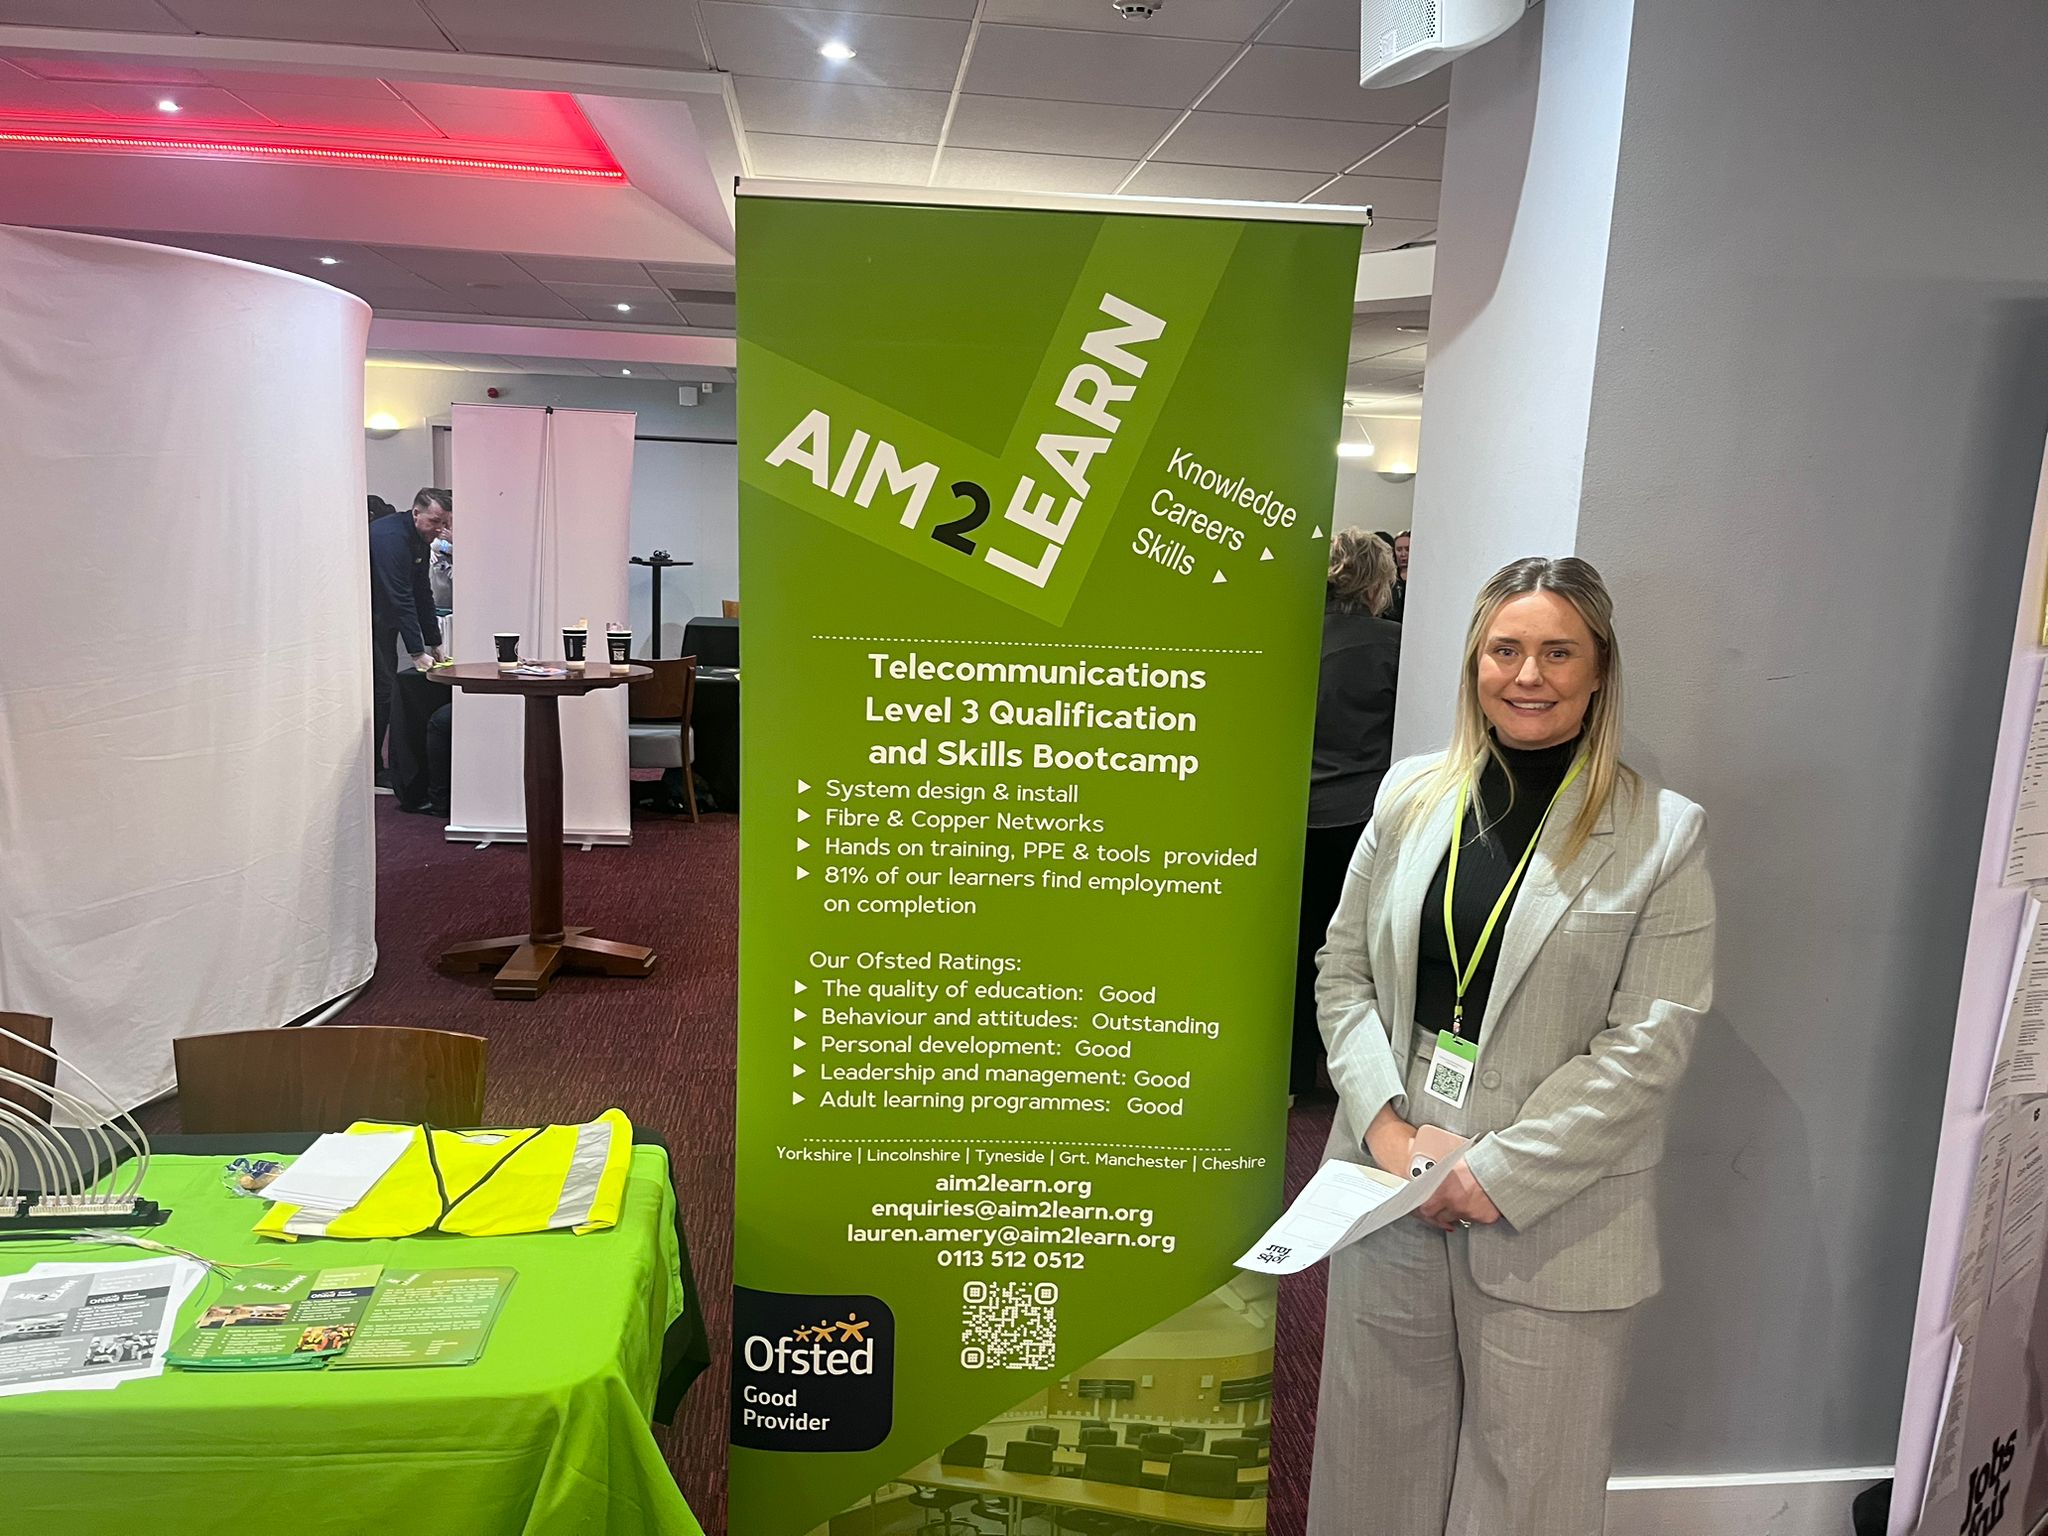 Aim2Learn at our event in Sheffield